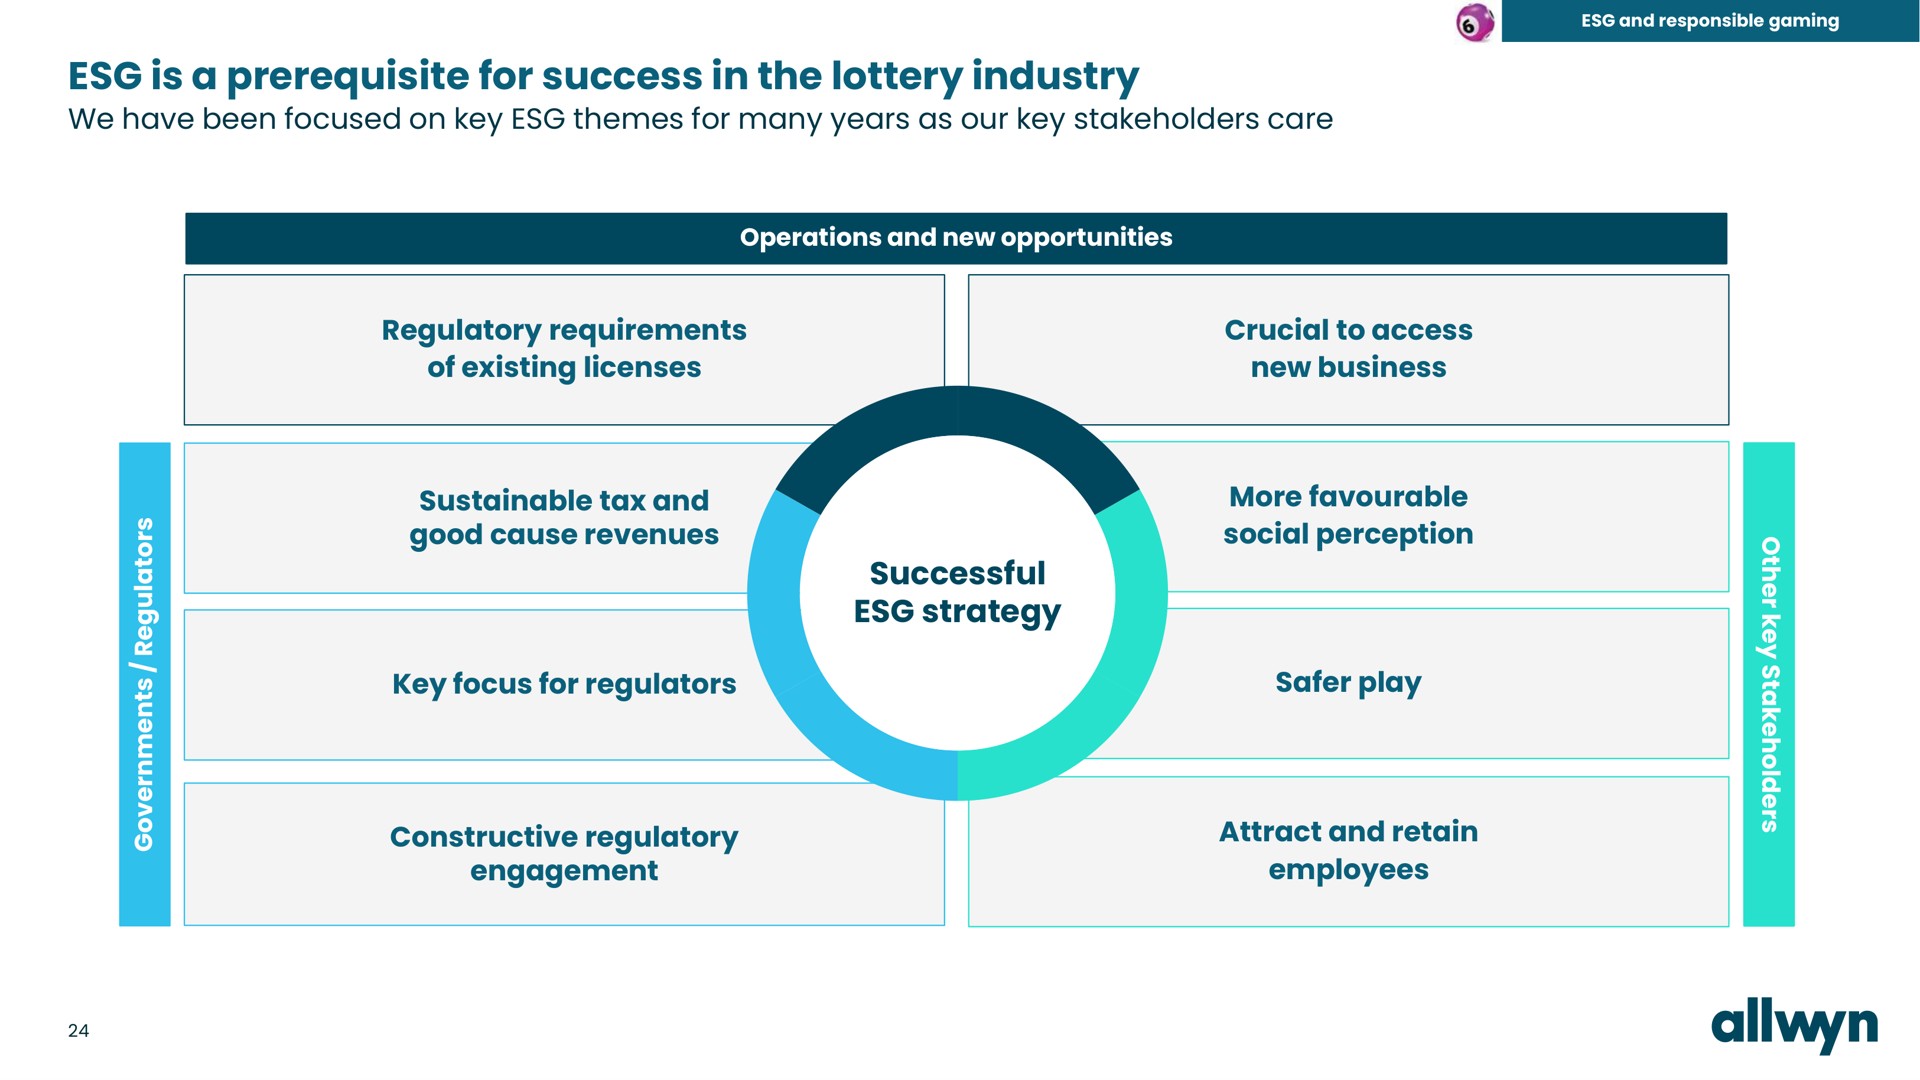 is a prerequisite for success in the lottery industry | Allwyn